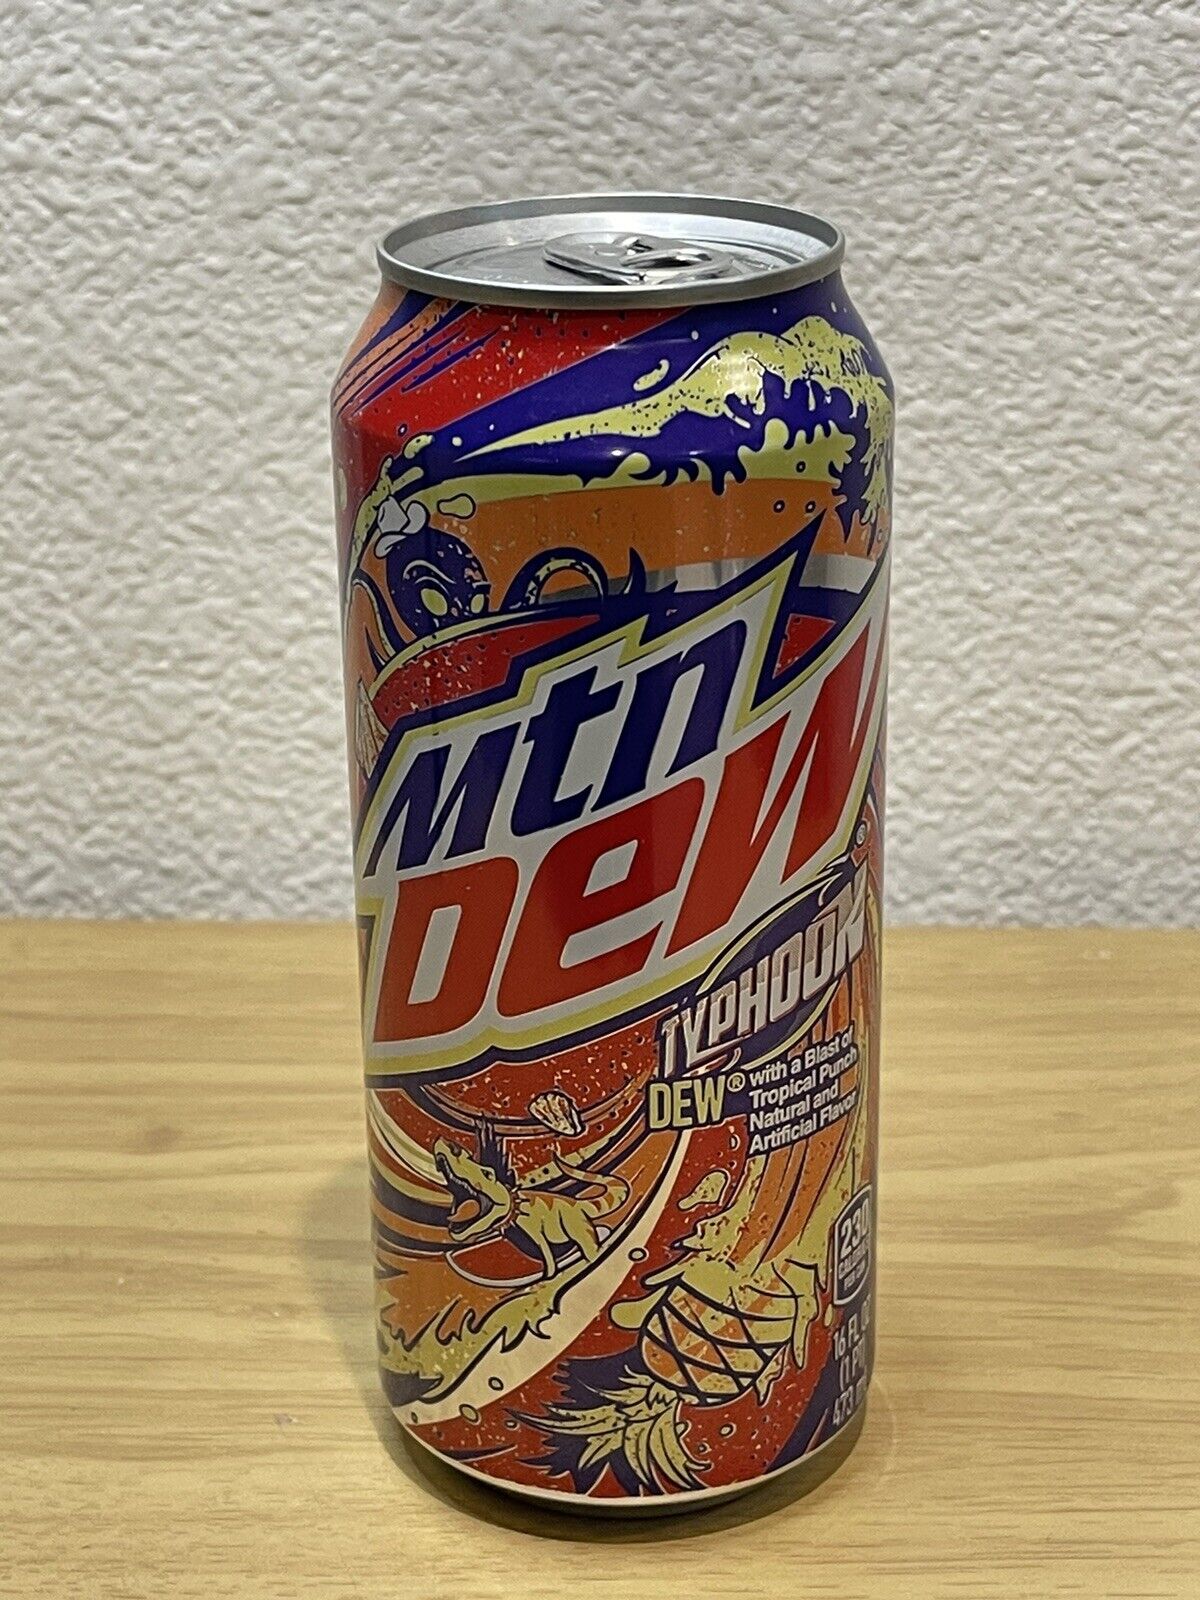 Mountain Dew Typhoon- 16 oz -Limited Edition (One Can) (Expired) Factory New